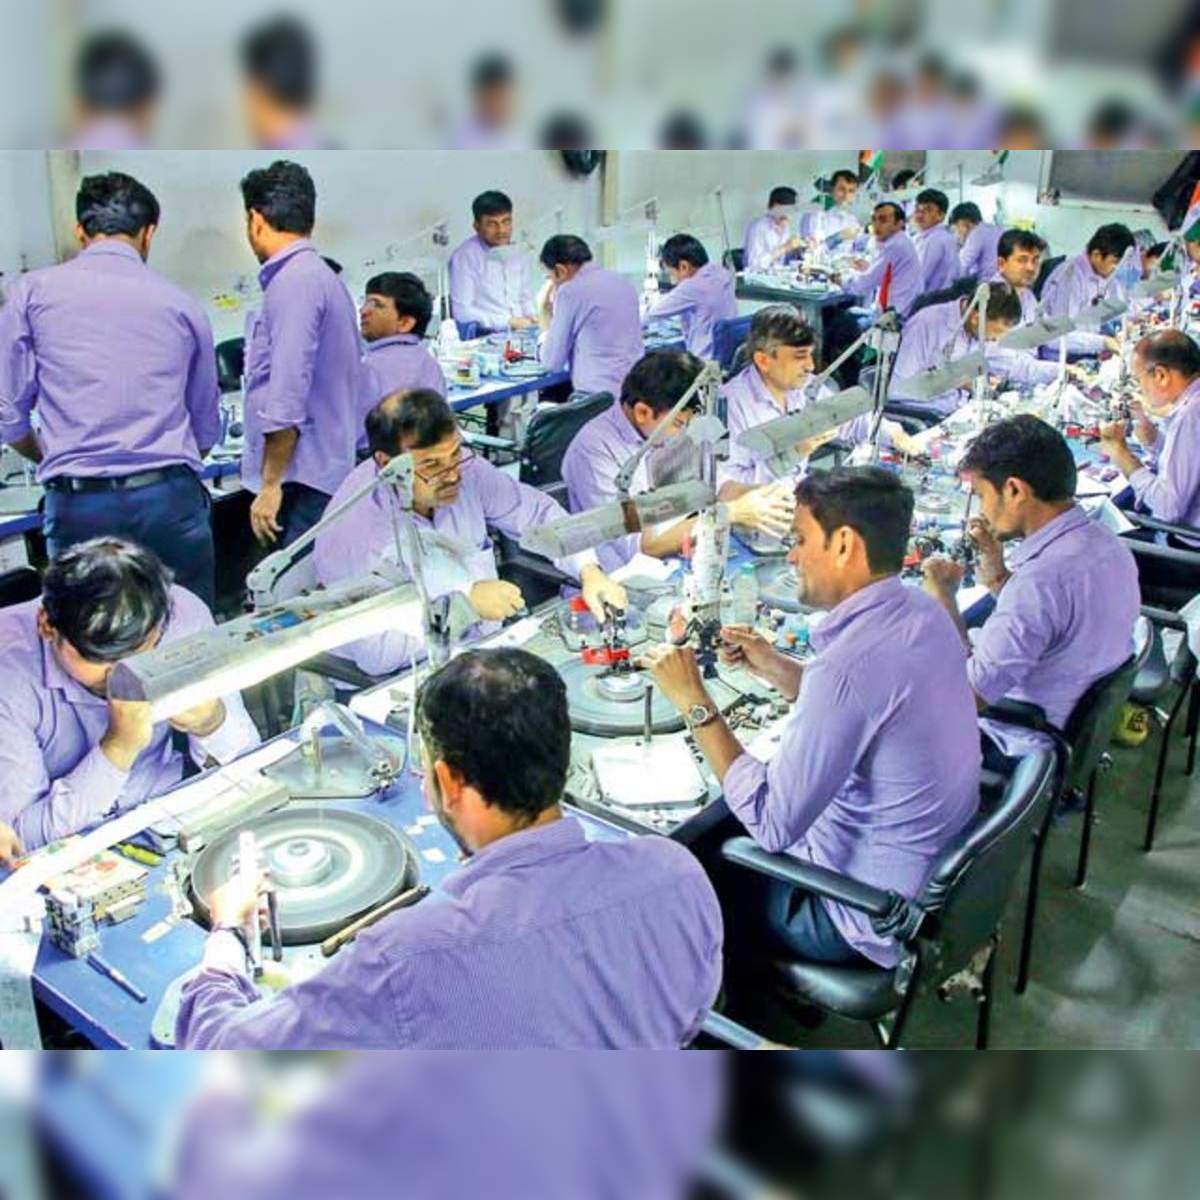 Xxx Surat Dumas Com - Diamond industry: What is really going on behind Surat's high-tech,  labour-intensive diamond industry? - The Economic Times